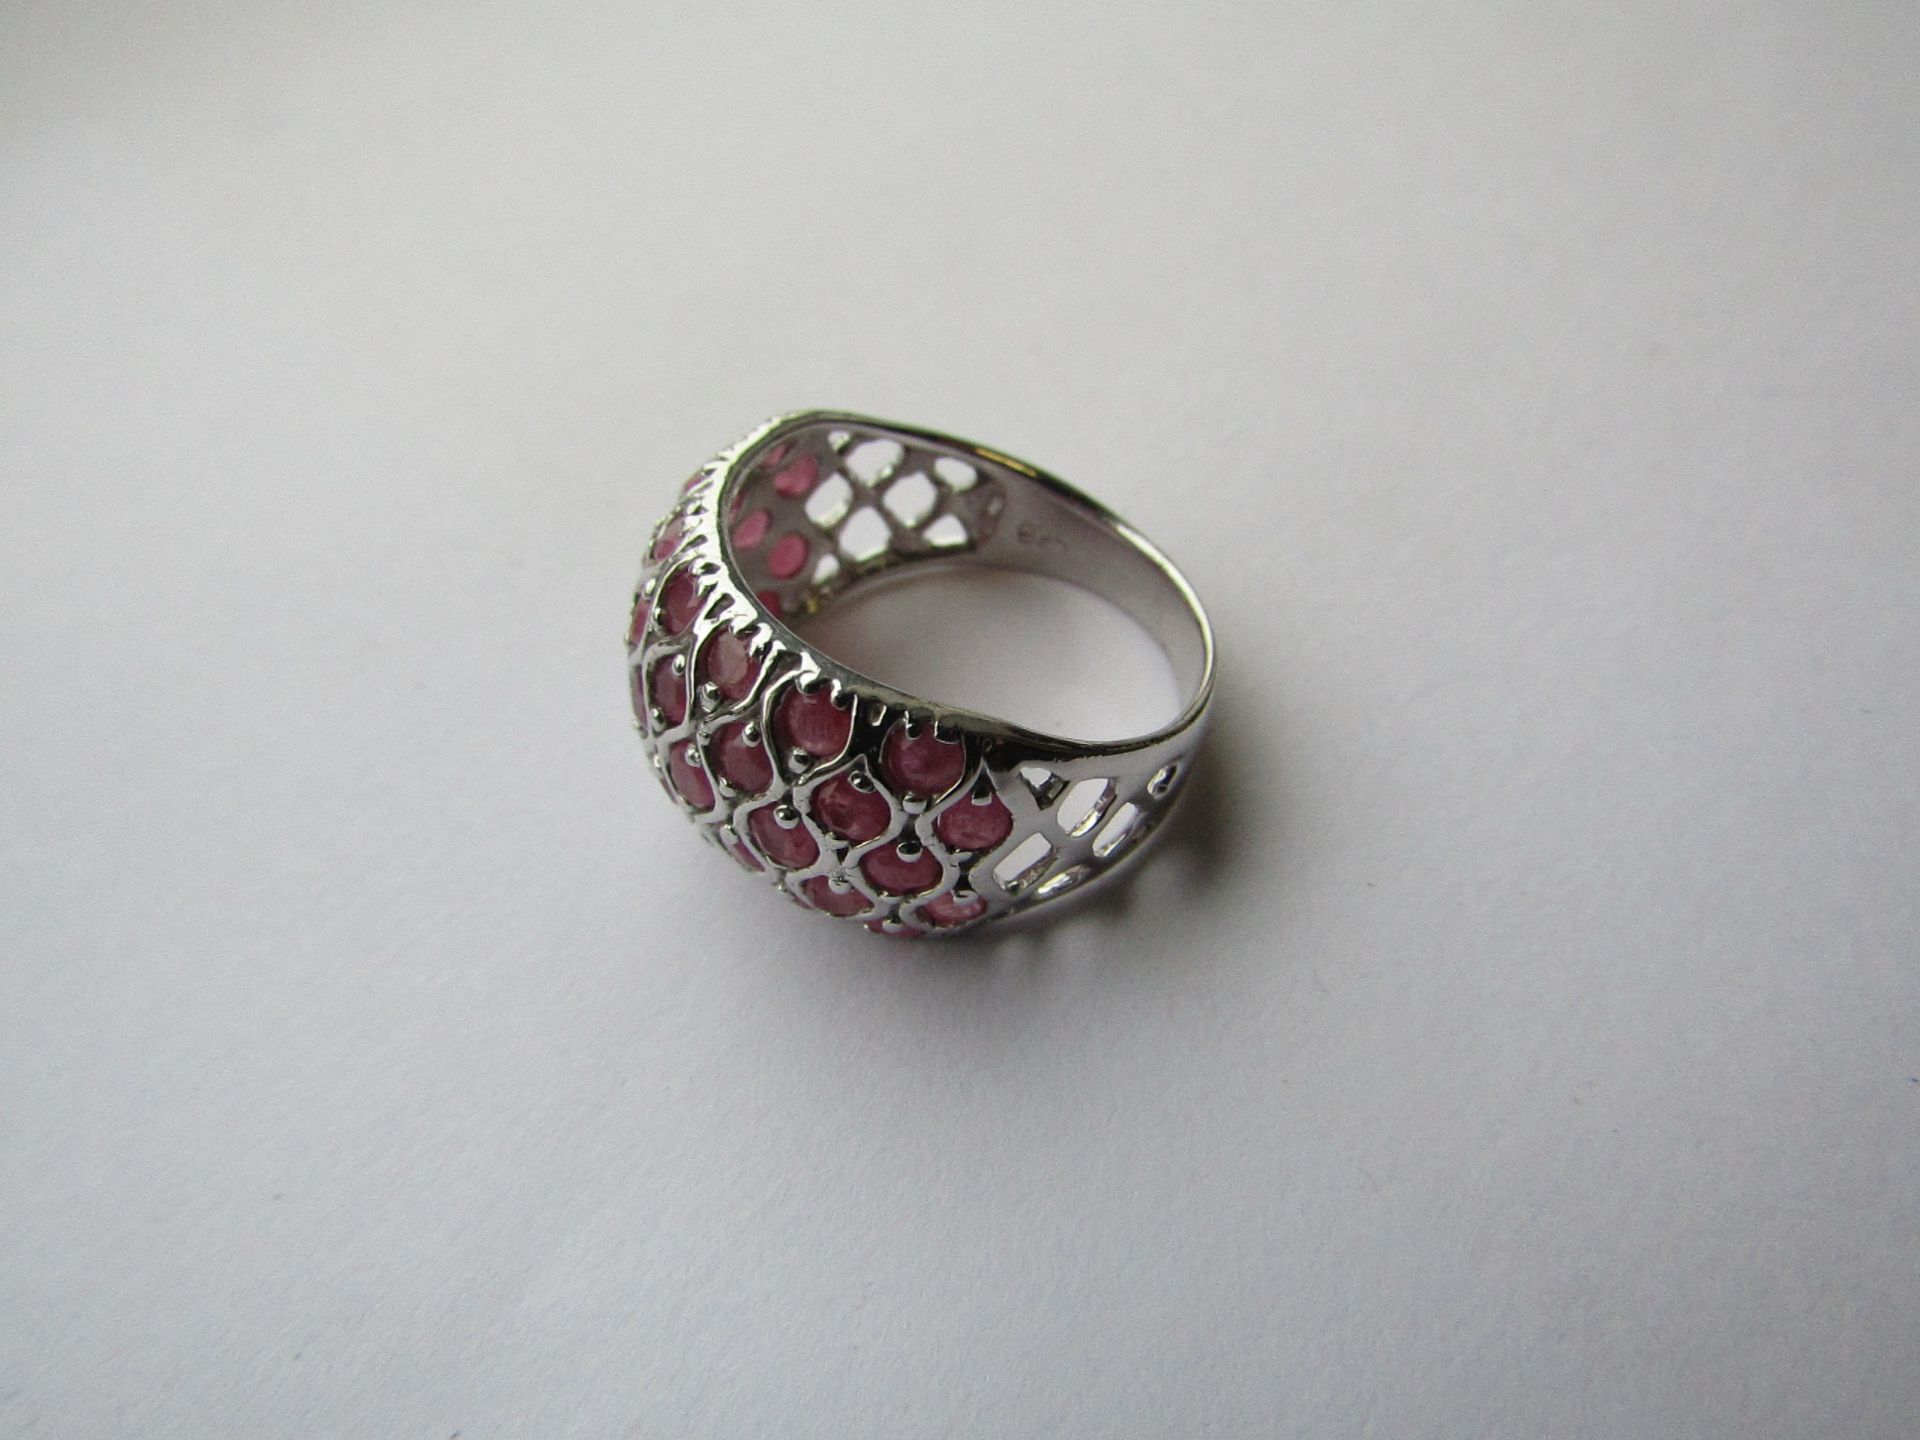 ELEGANT ROUND NATURAL RICH RED PINK RUBY RING, SET WITH 35 NATURAL RUBIES. RRP £1500 STERLING SILVER - Image 2 of 3